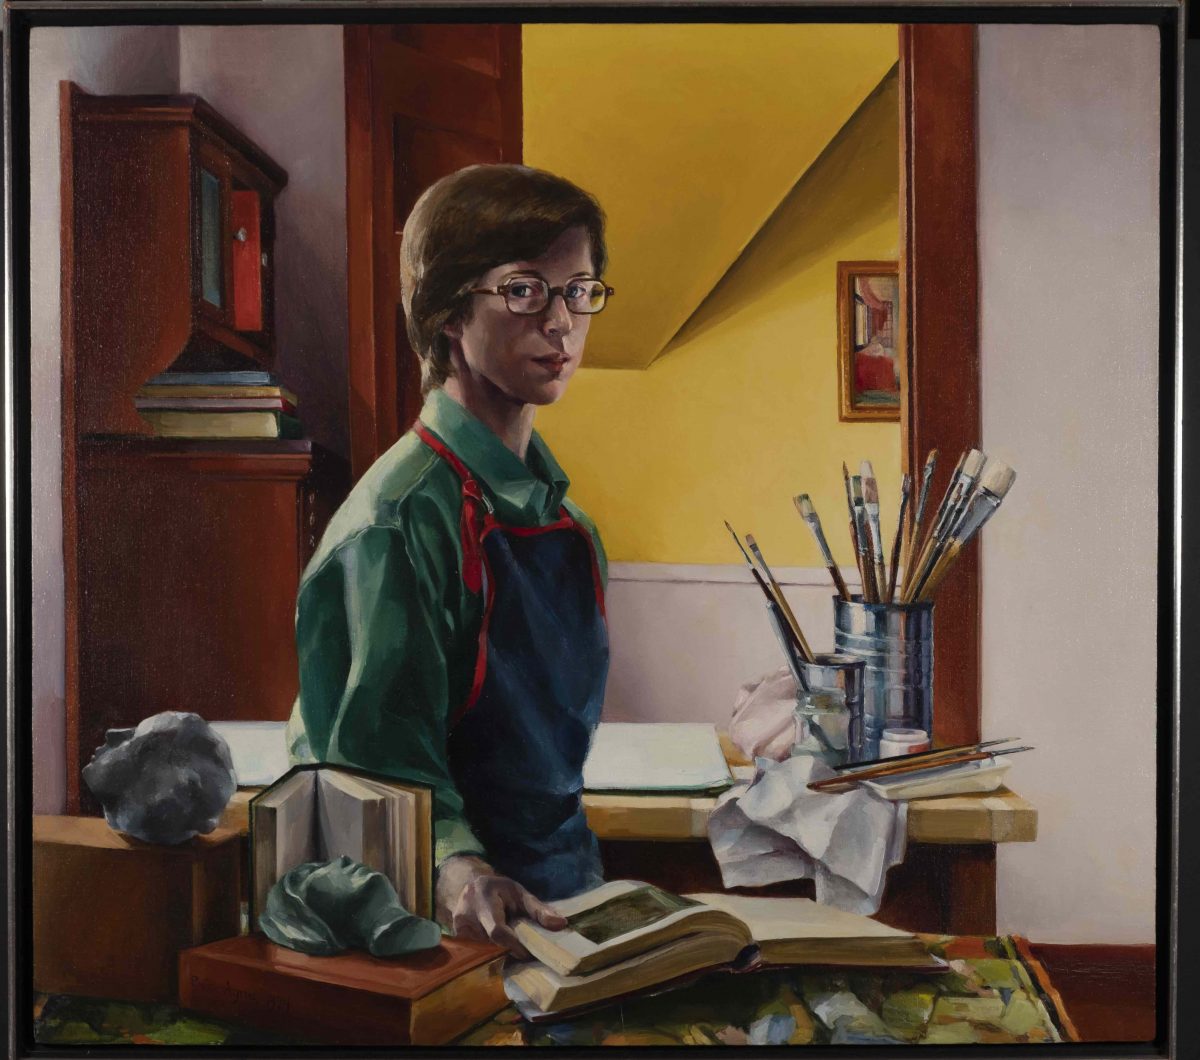 Painting as Mirror (self portrait) by Phyllis Agne